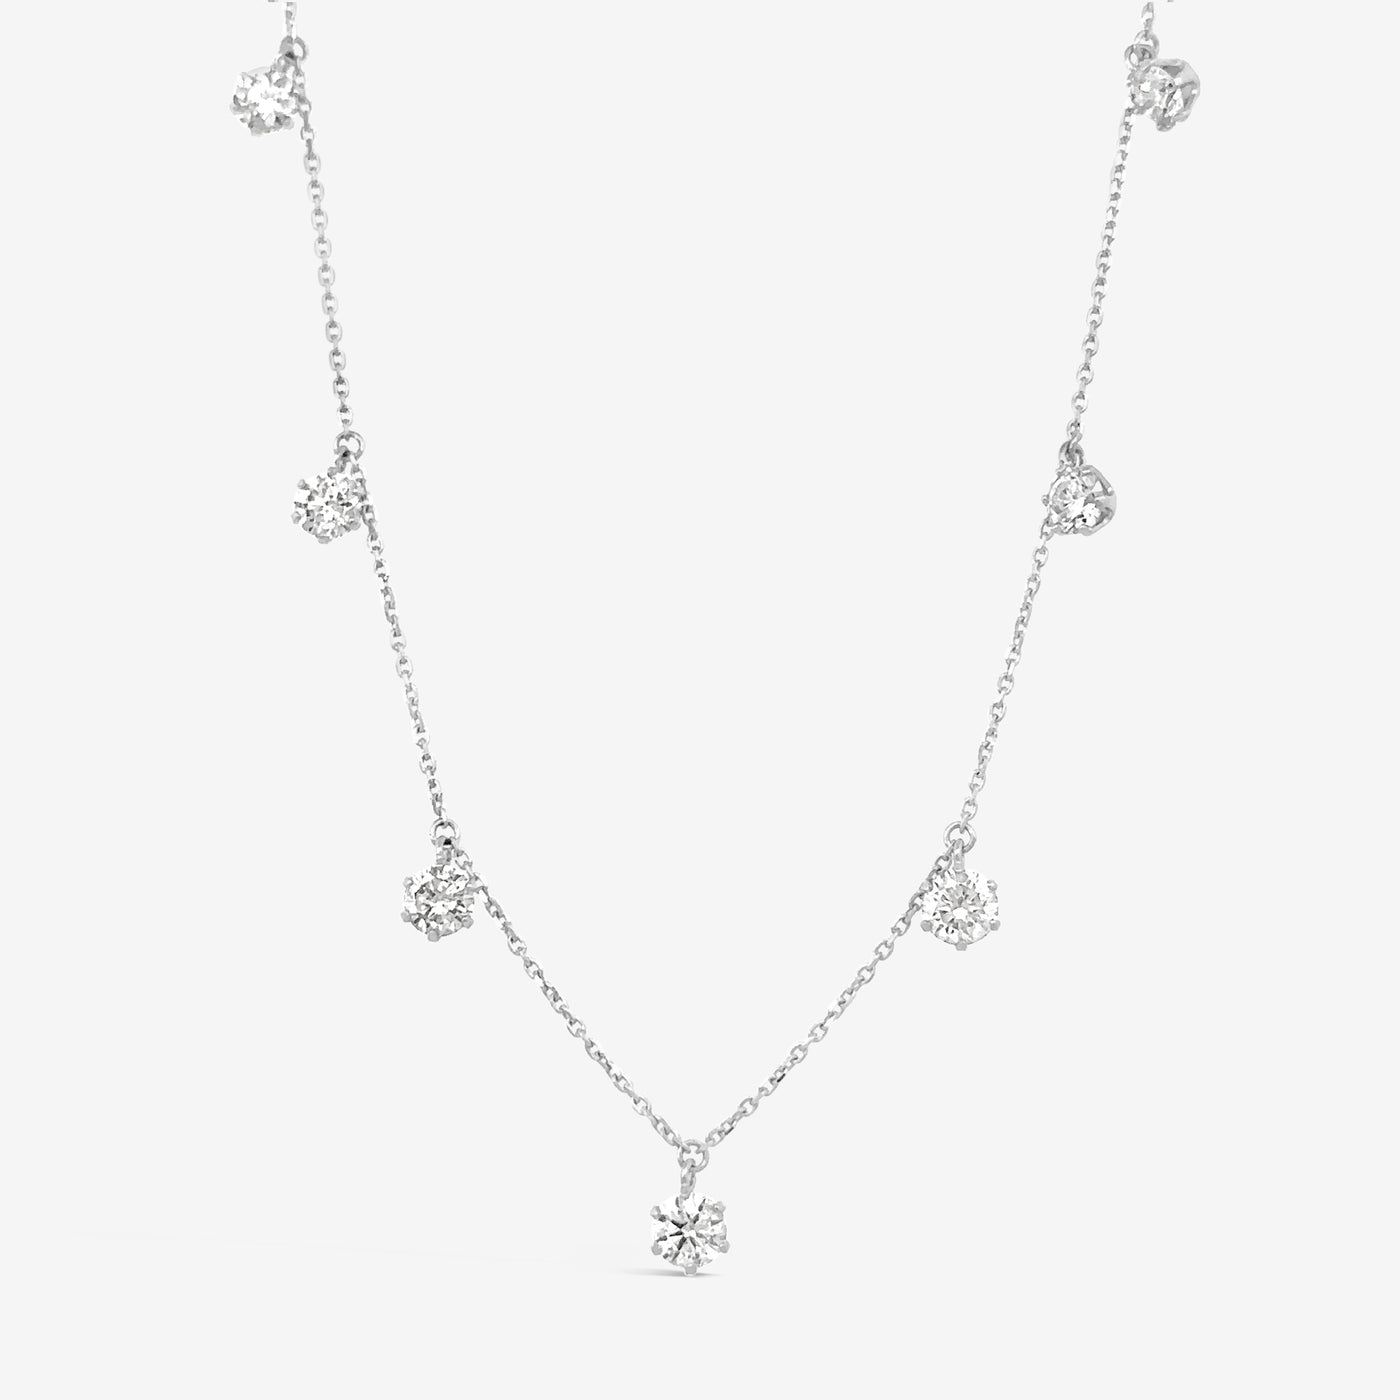 7 Drops By The Yard 1.00CT Diamond Necklace